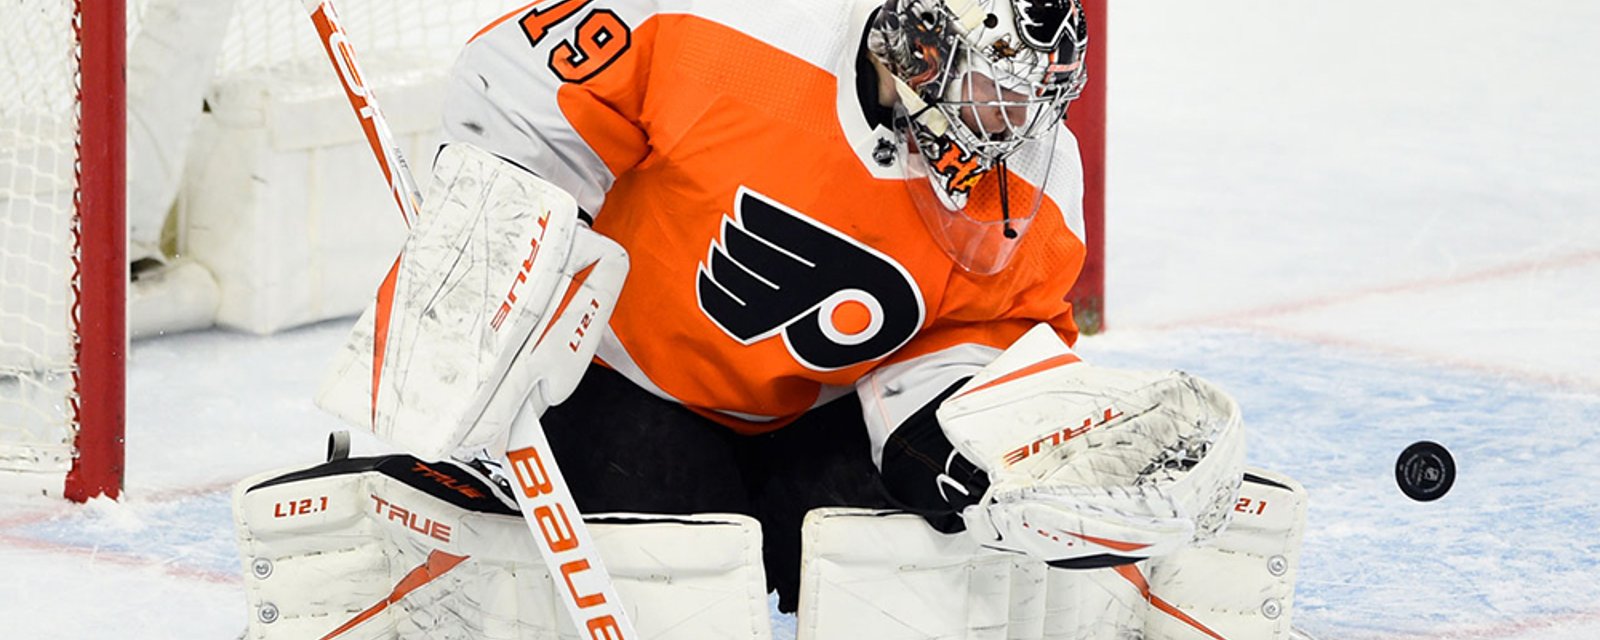 Carter Hart knows that next season will bring brighter days for Flyers 